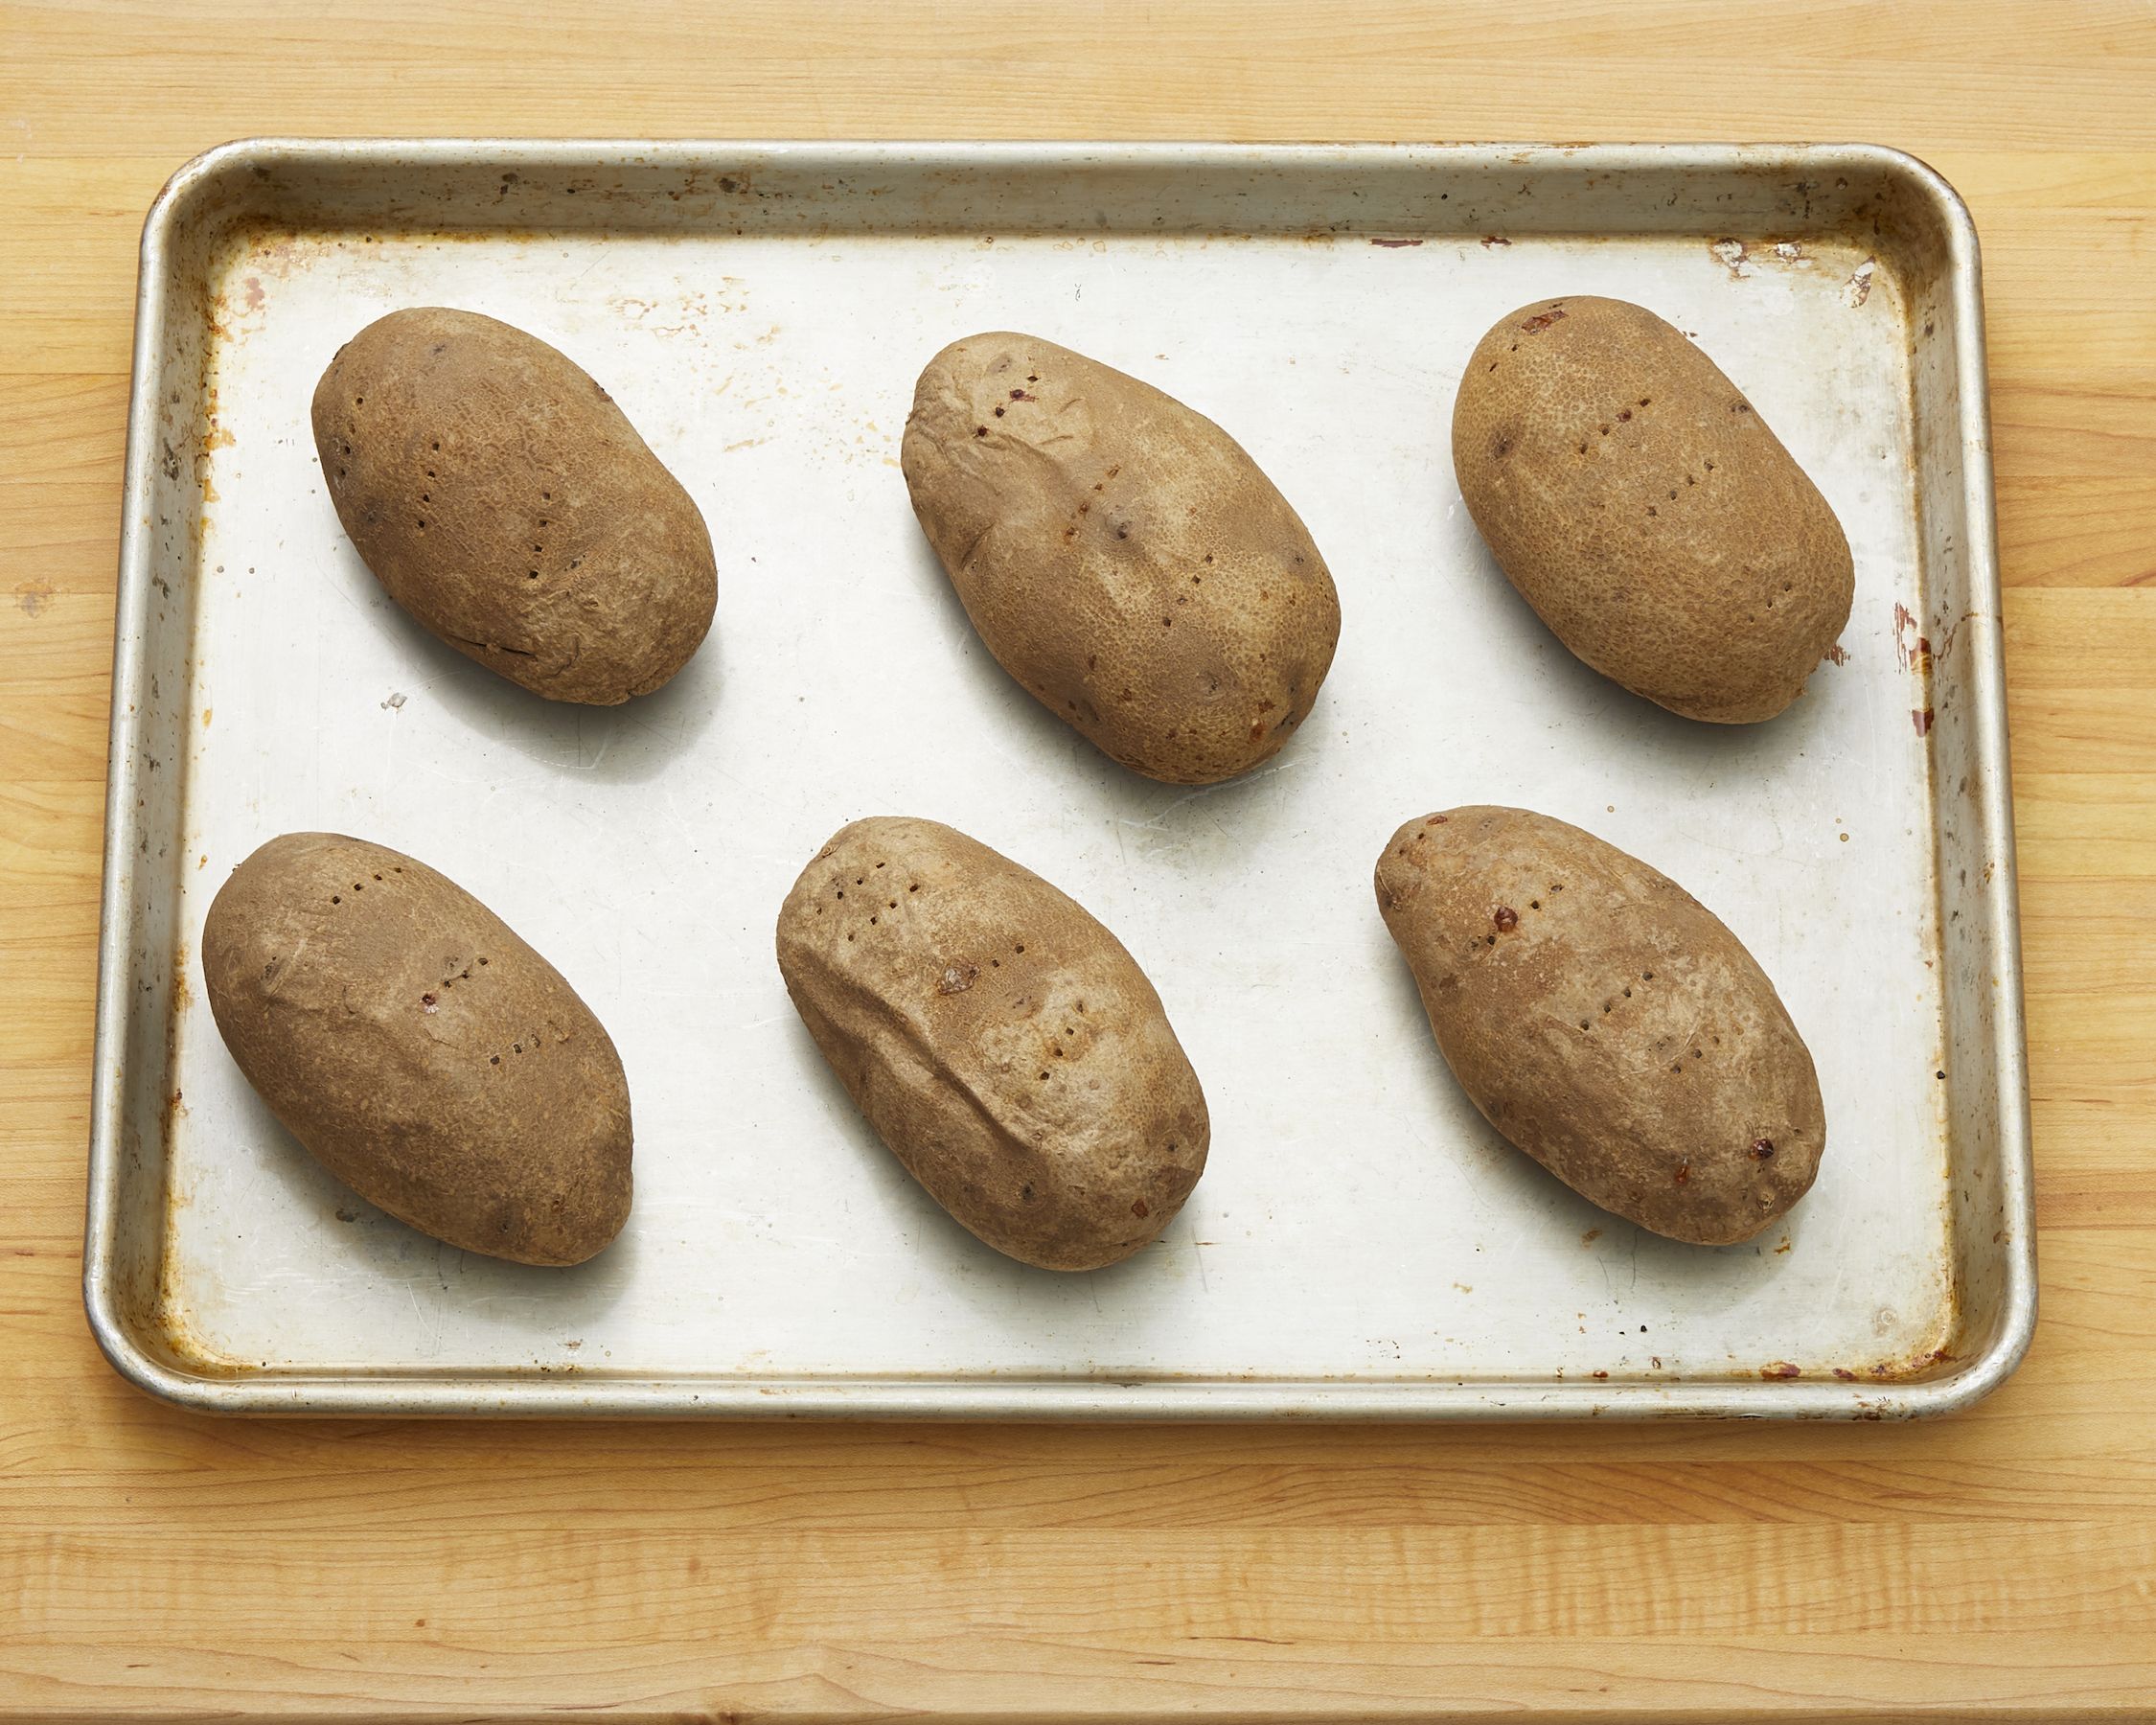 Roeispaan trog vod How to Bake a Potato in the Oven - Best Easy Baked Potato Recipe